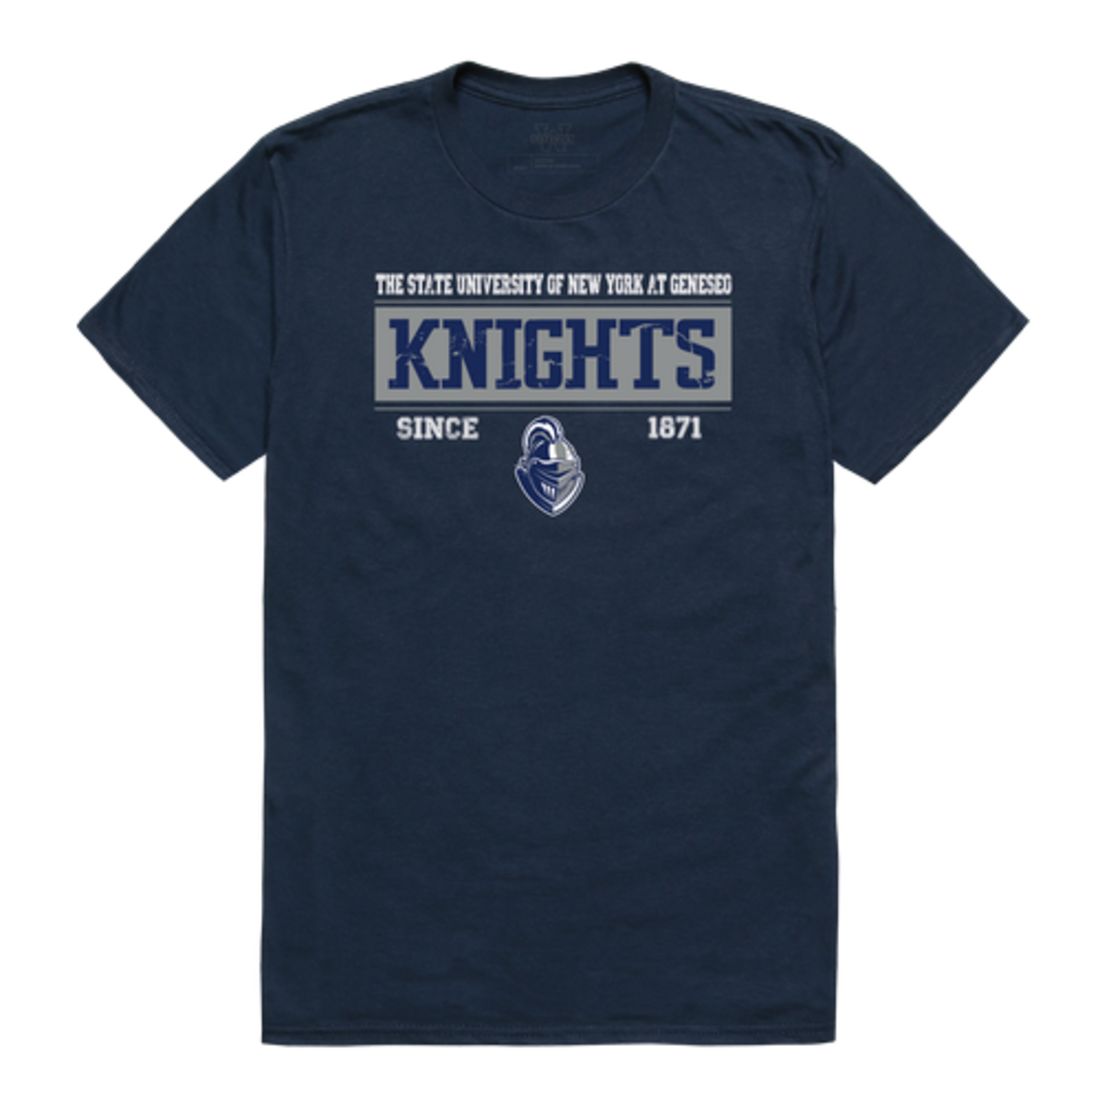 State University of New York at Geneseo Knights Established T-Shirt